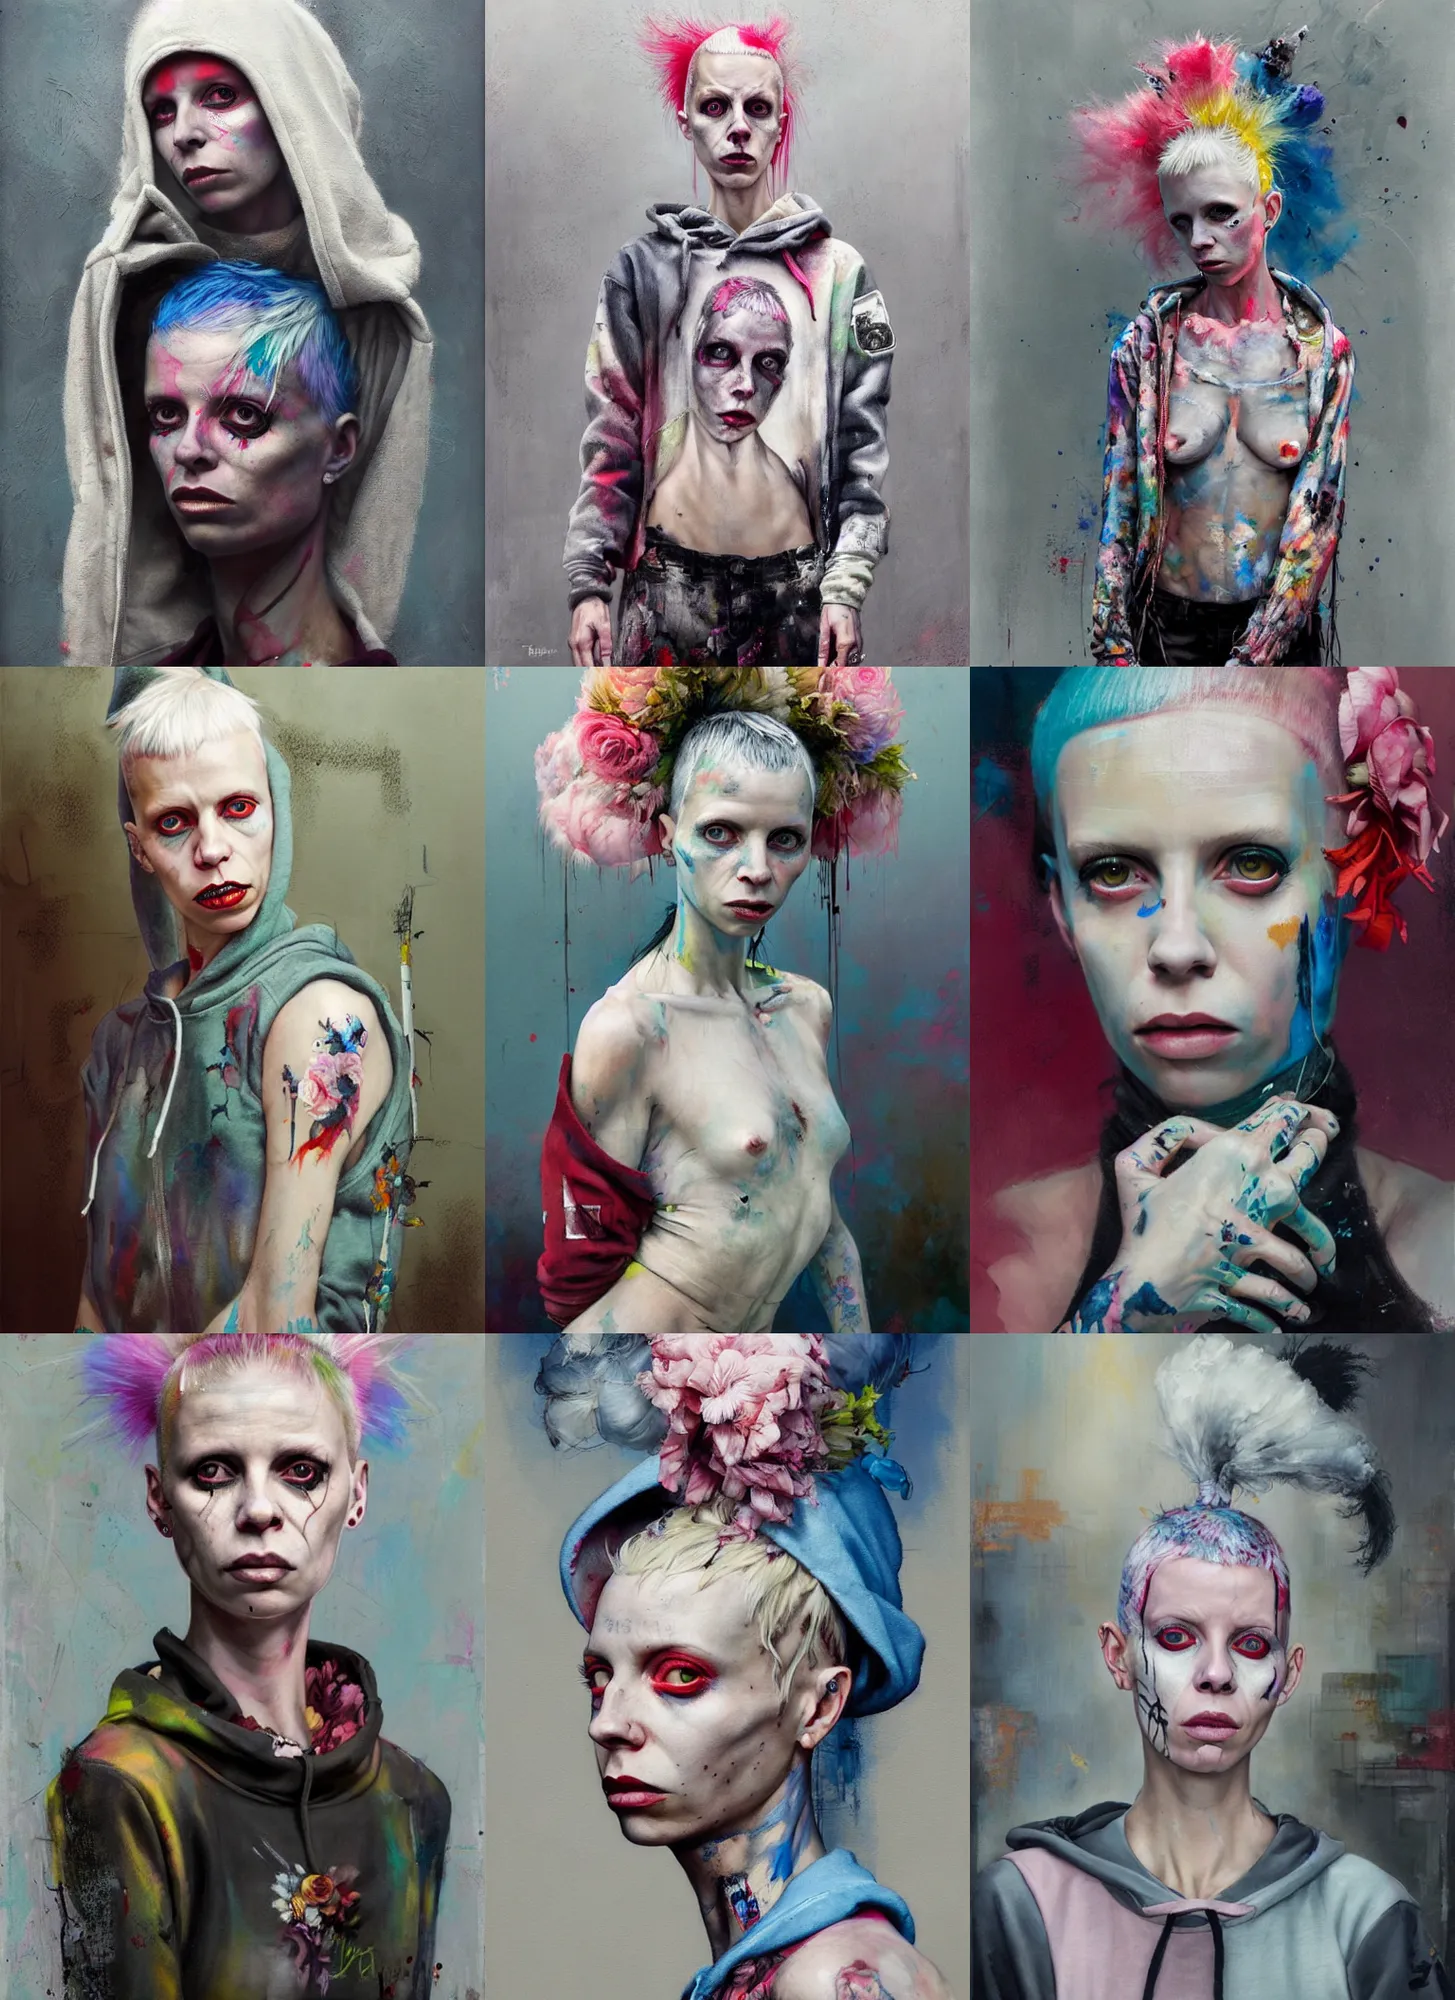 Prompt: painting by martine johanna of yolandi visser wearing a hoodie standing in a township street in the style of jeremy mann, street clothing, haute couture! fashion!, full figure painting by tom bagshaw, tara mcpherson, david choe, decorative flowers, detailed painterly impasto brushwork, pastel color palette, die antwoord